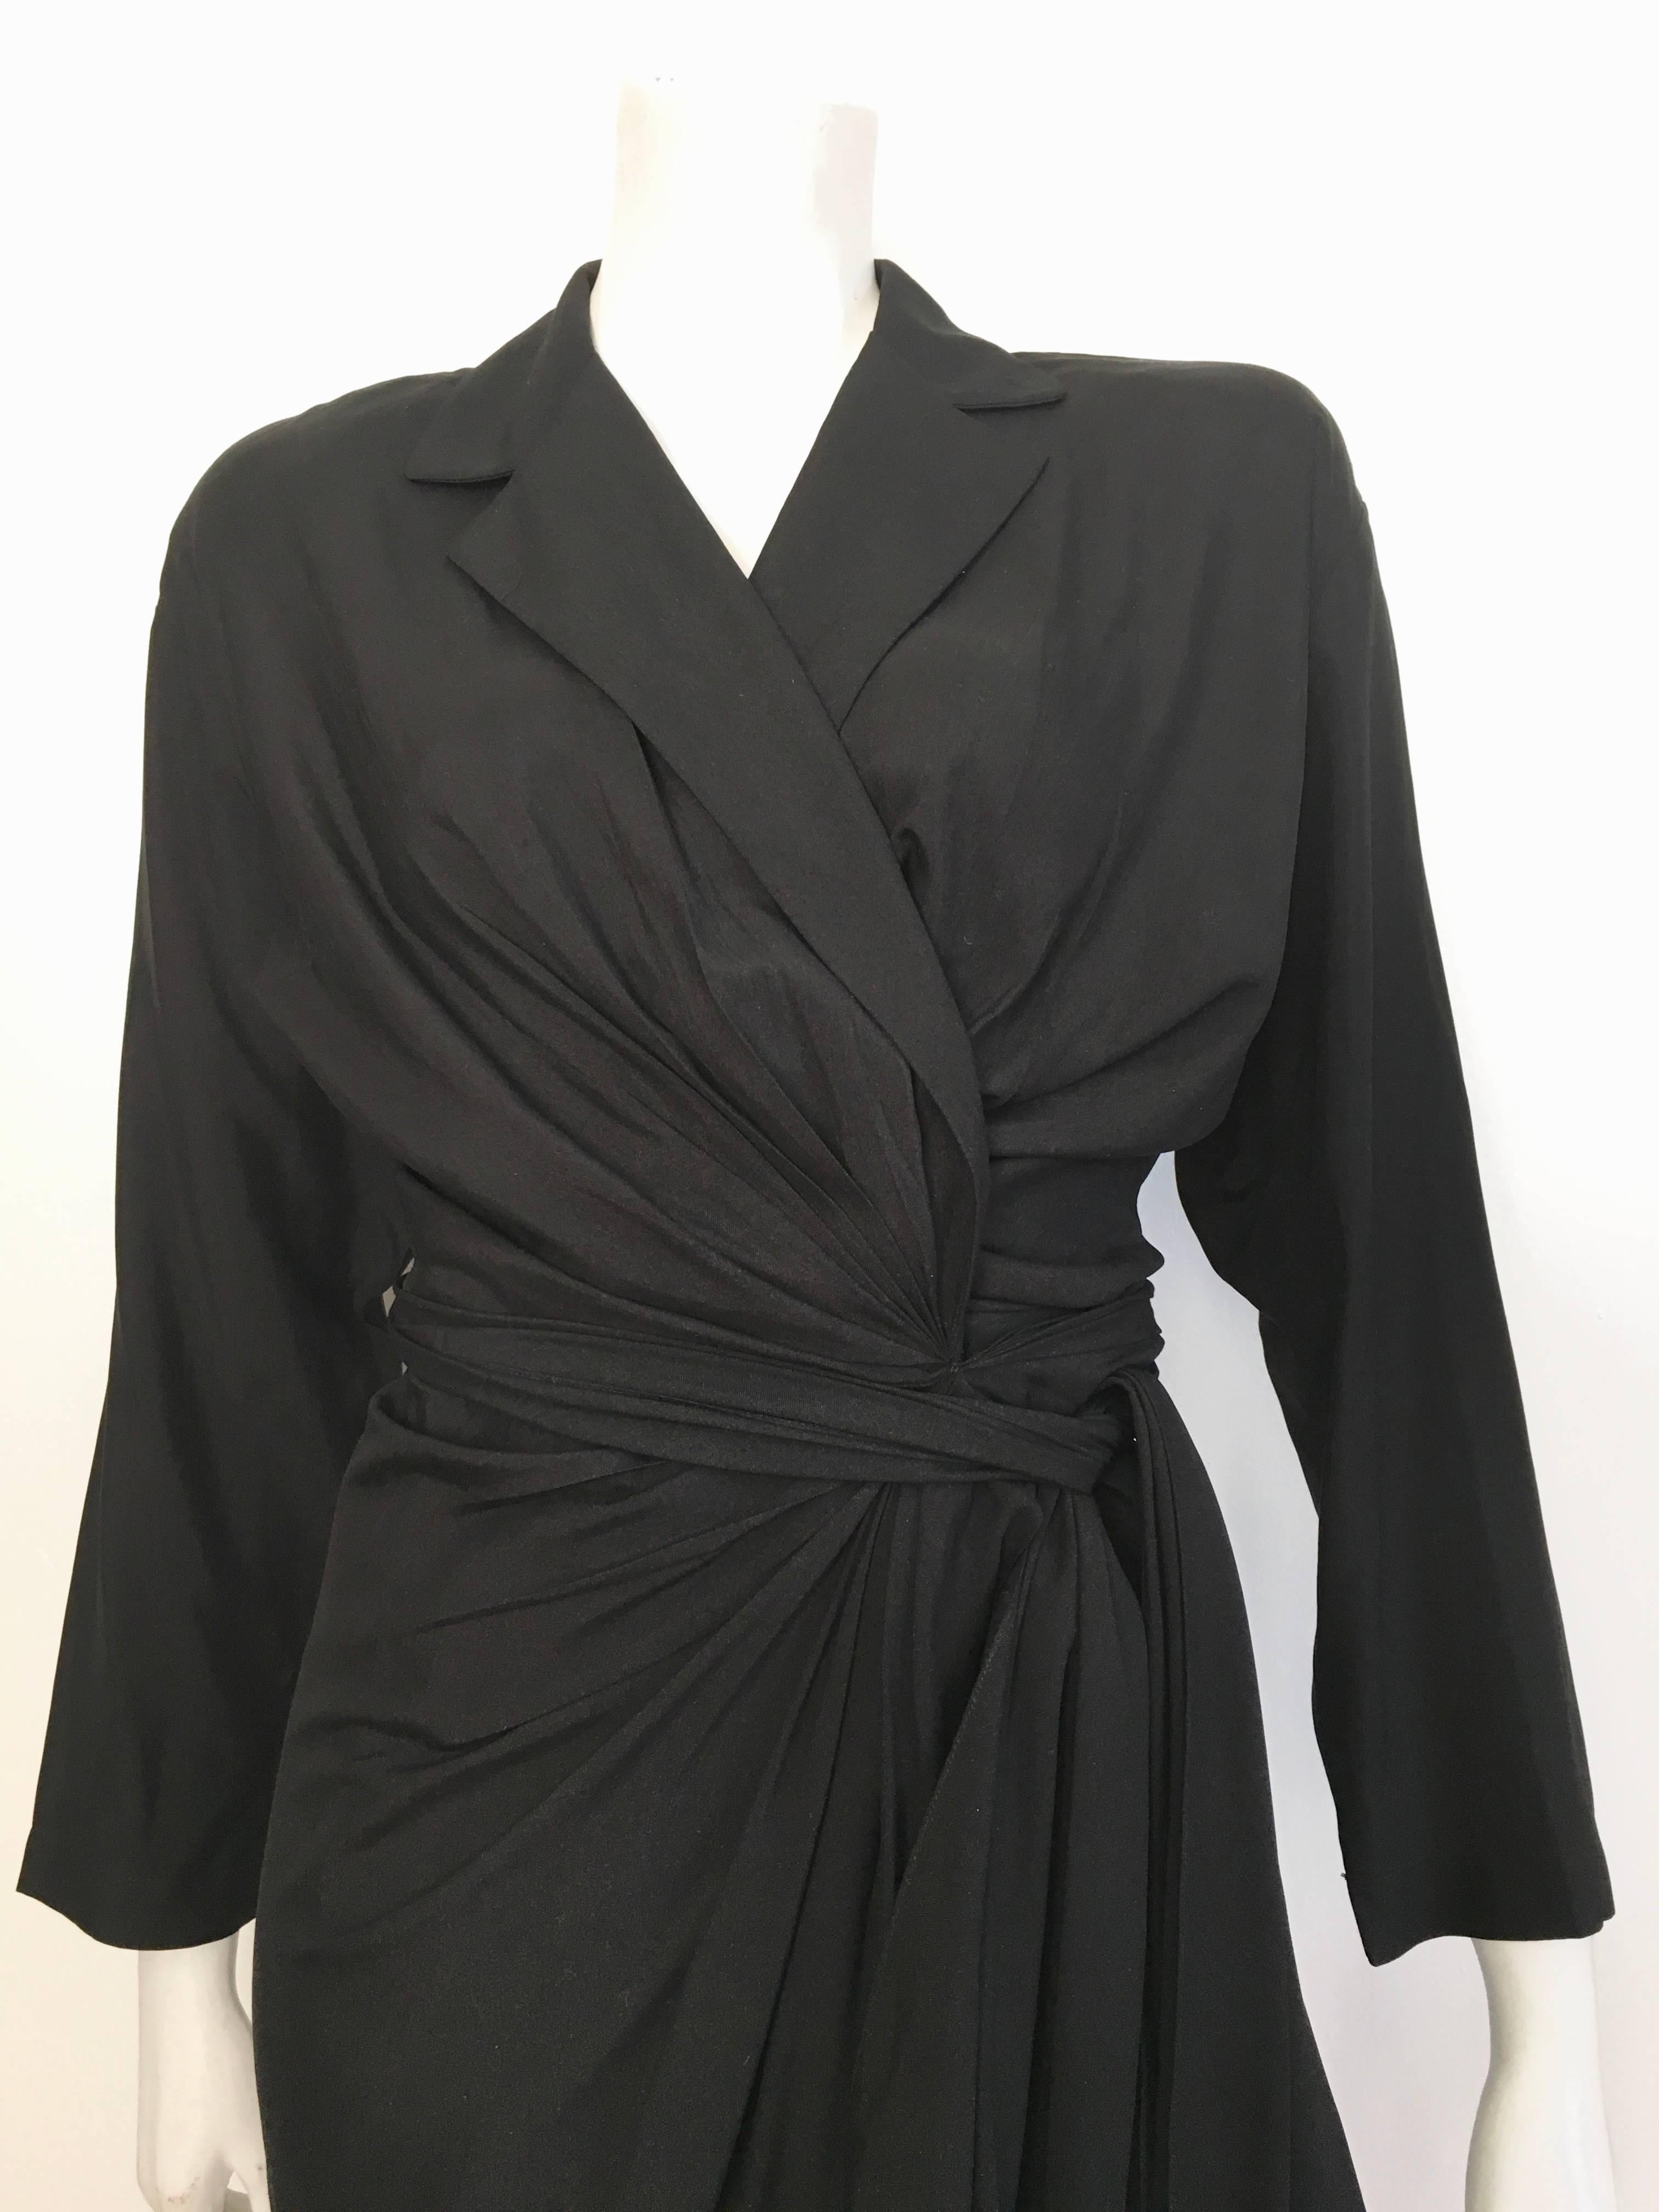 Donna Karan New York 1980s black silk wrap dress is labeled a size 10 but fits like a size 8.  The waist is 31